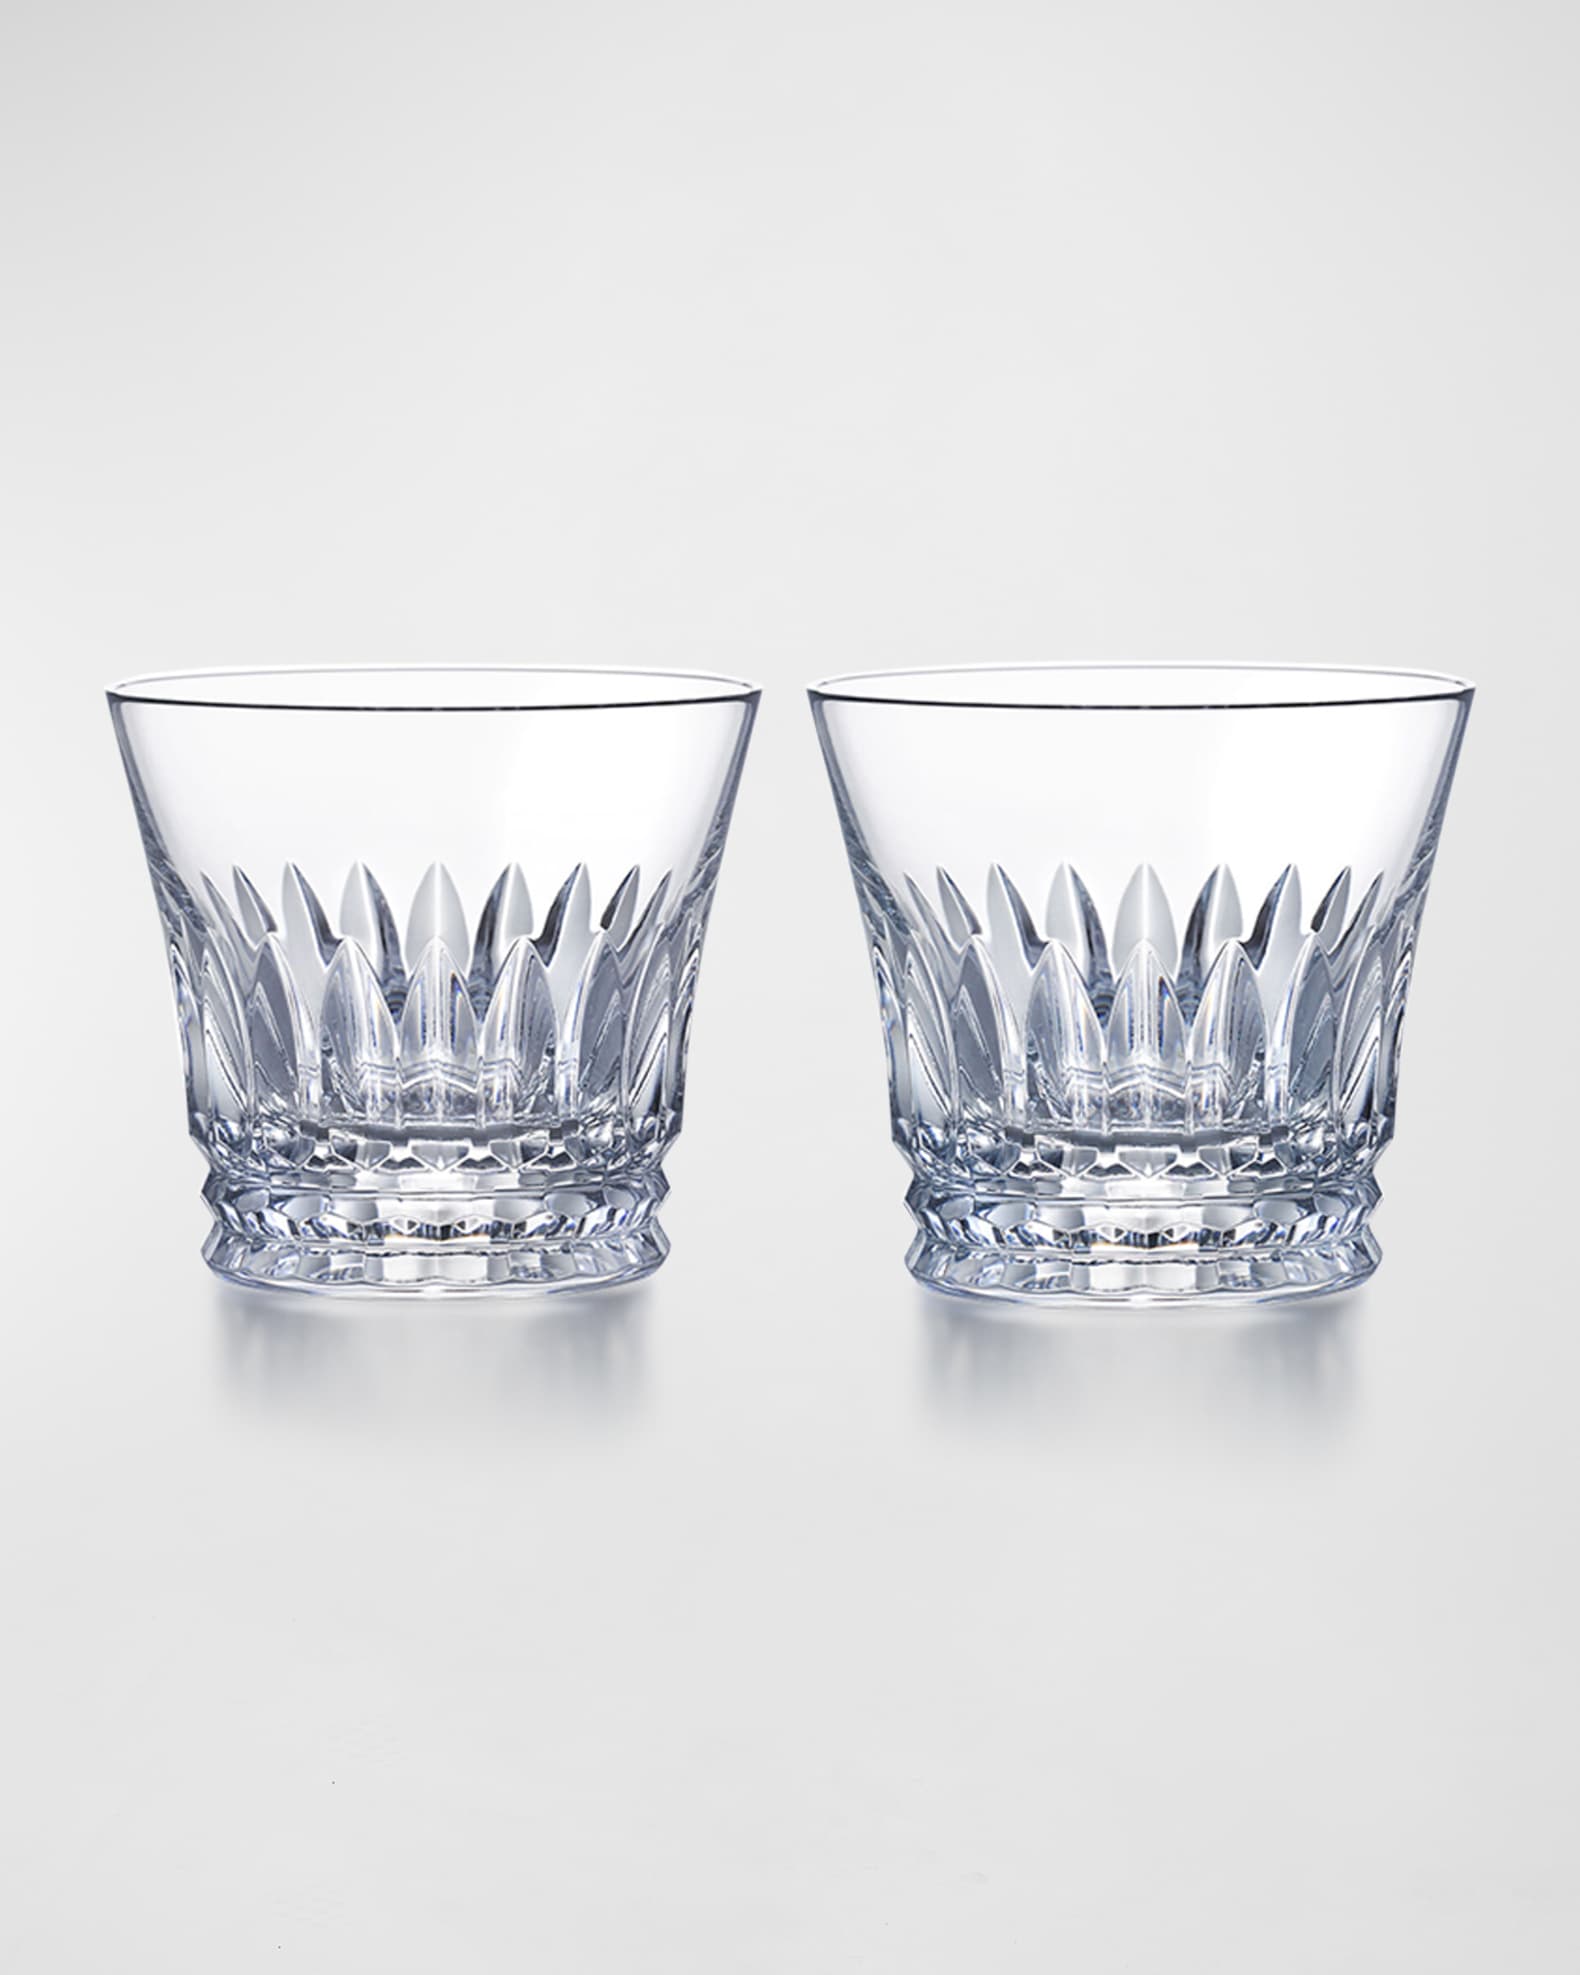 NEW Baccarat Everyday Set of 2 Tumblers Crysta